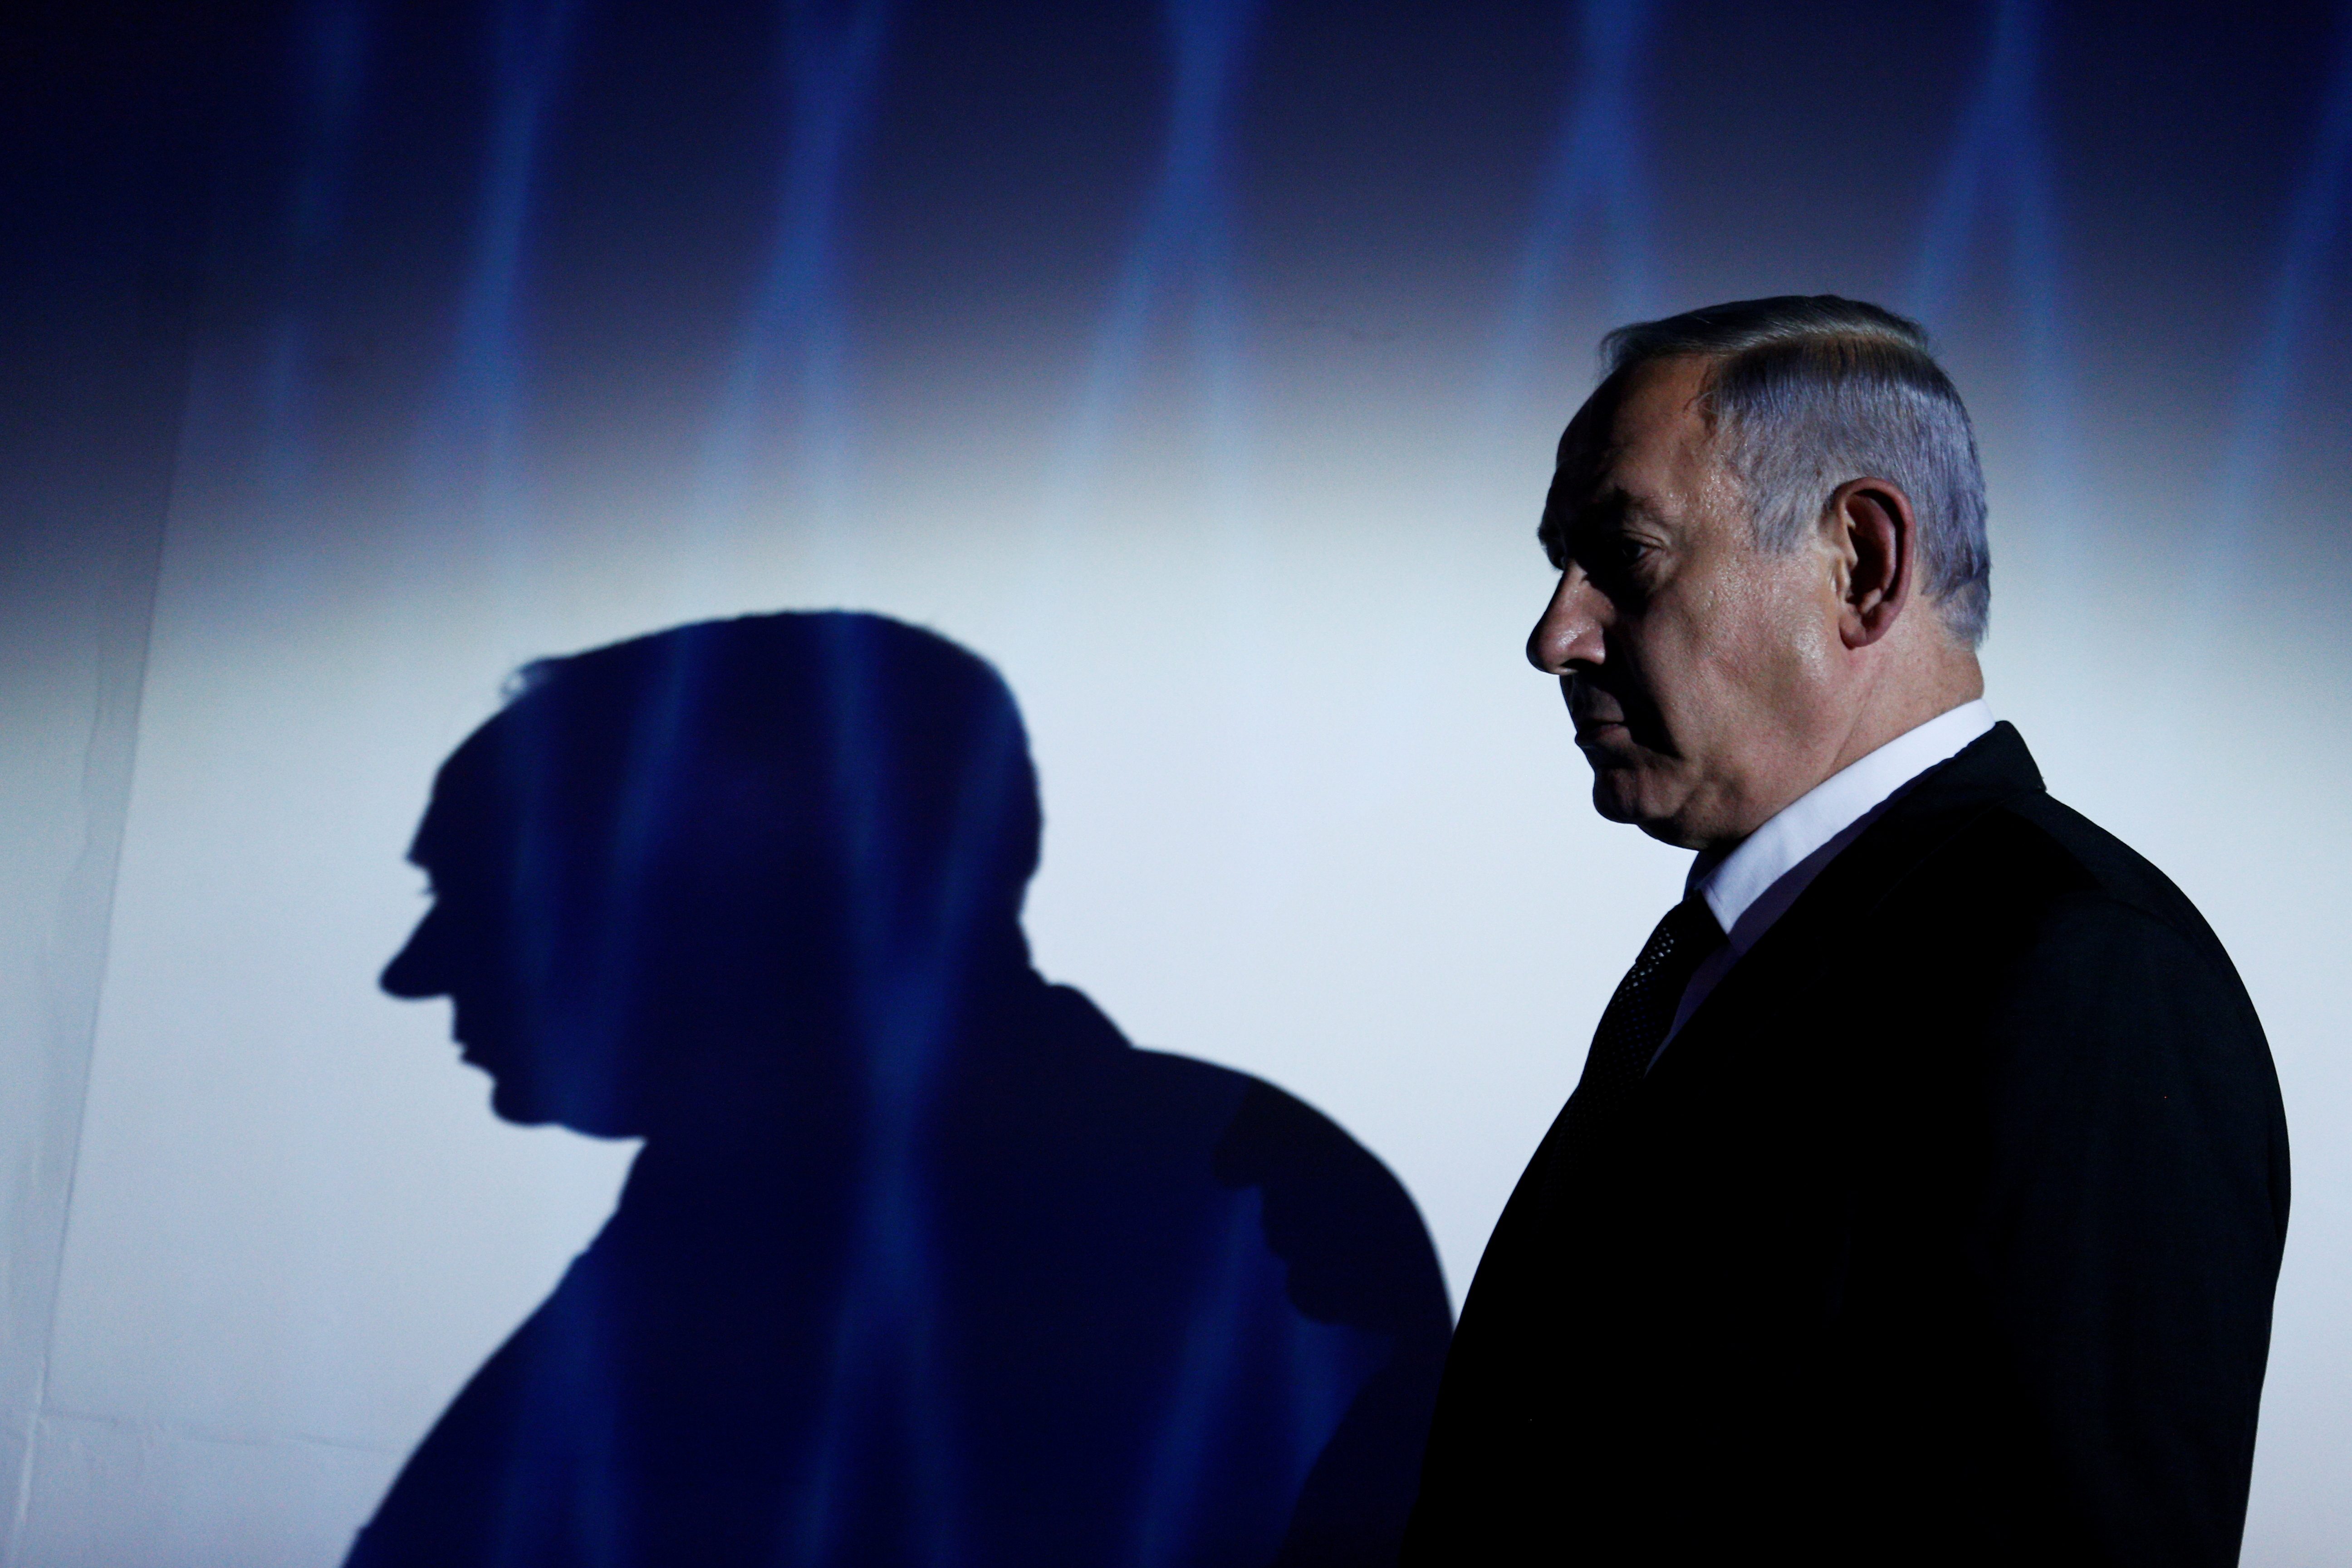 Netanyahu, battling for political life, attacks deal to unseat him